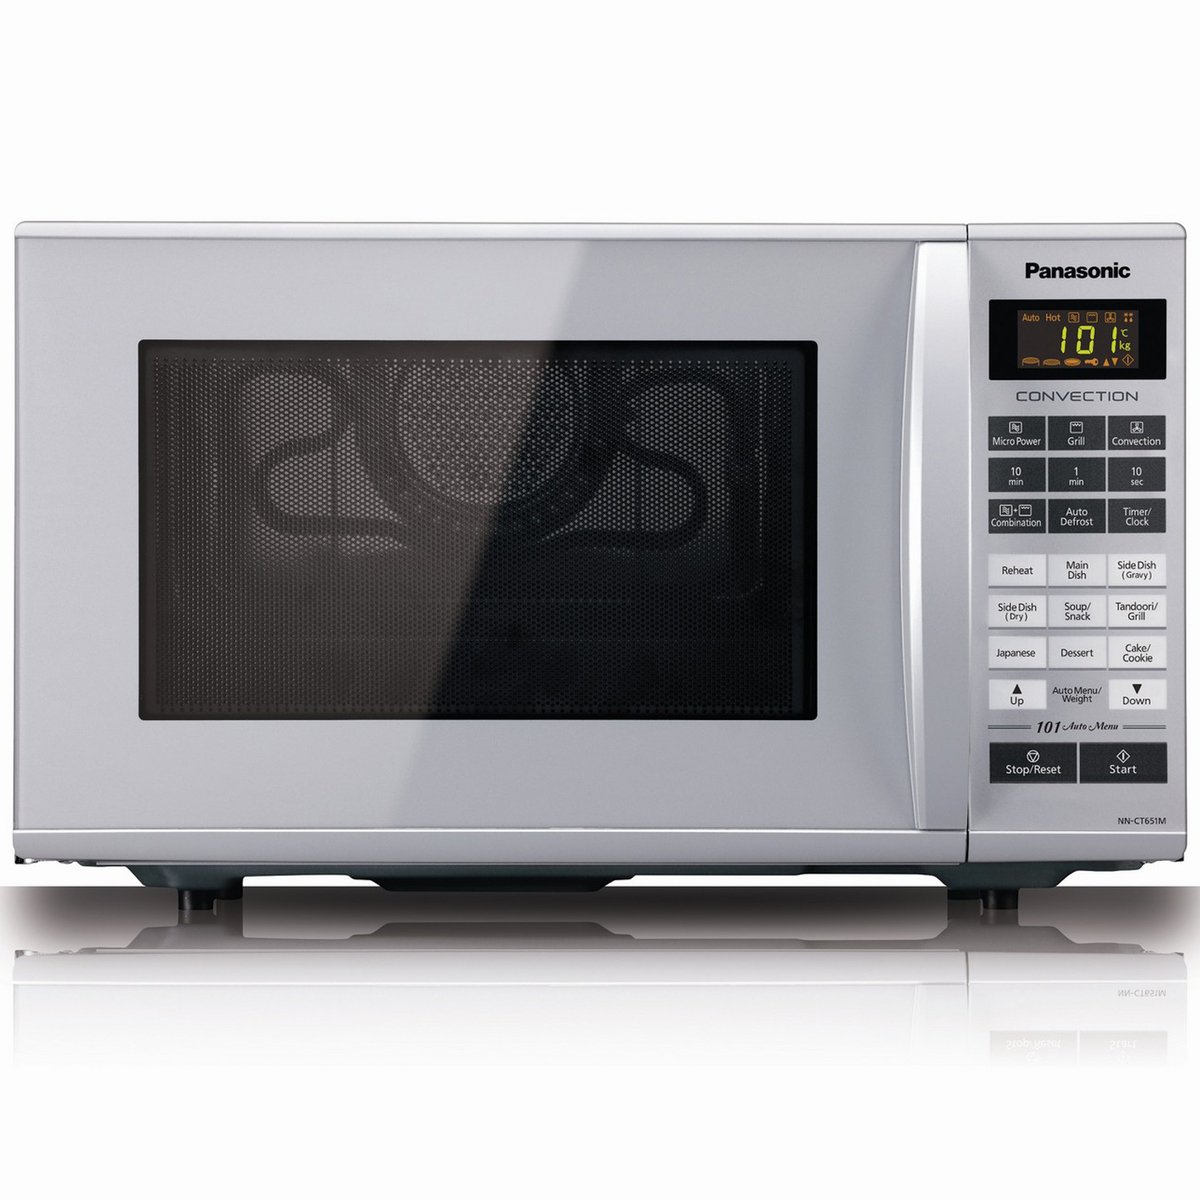 Panasonic Microwave Oven with Grill NNCT651 27Ltr